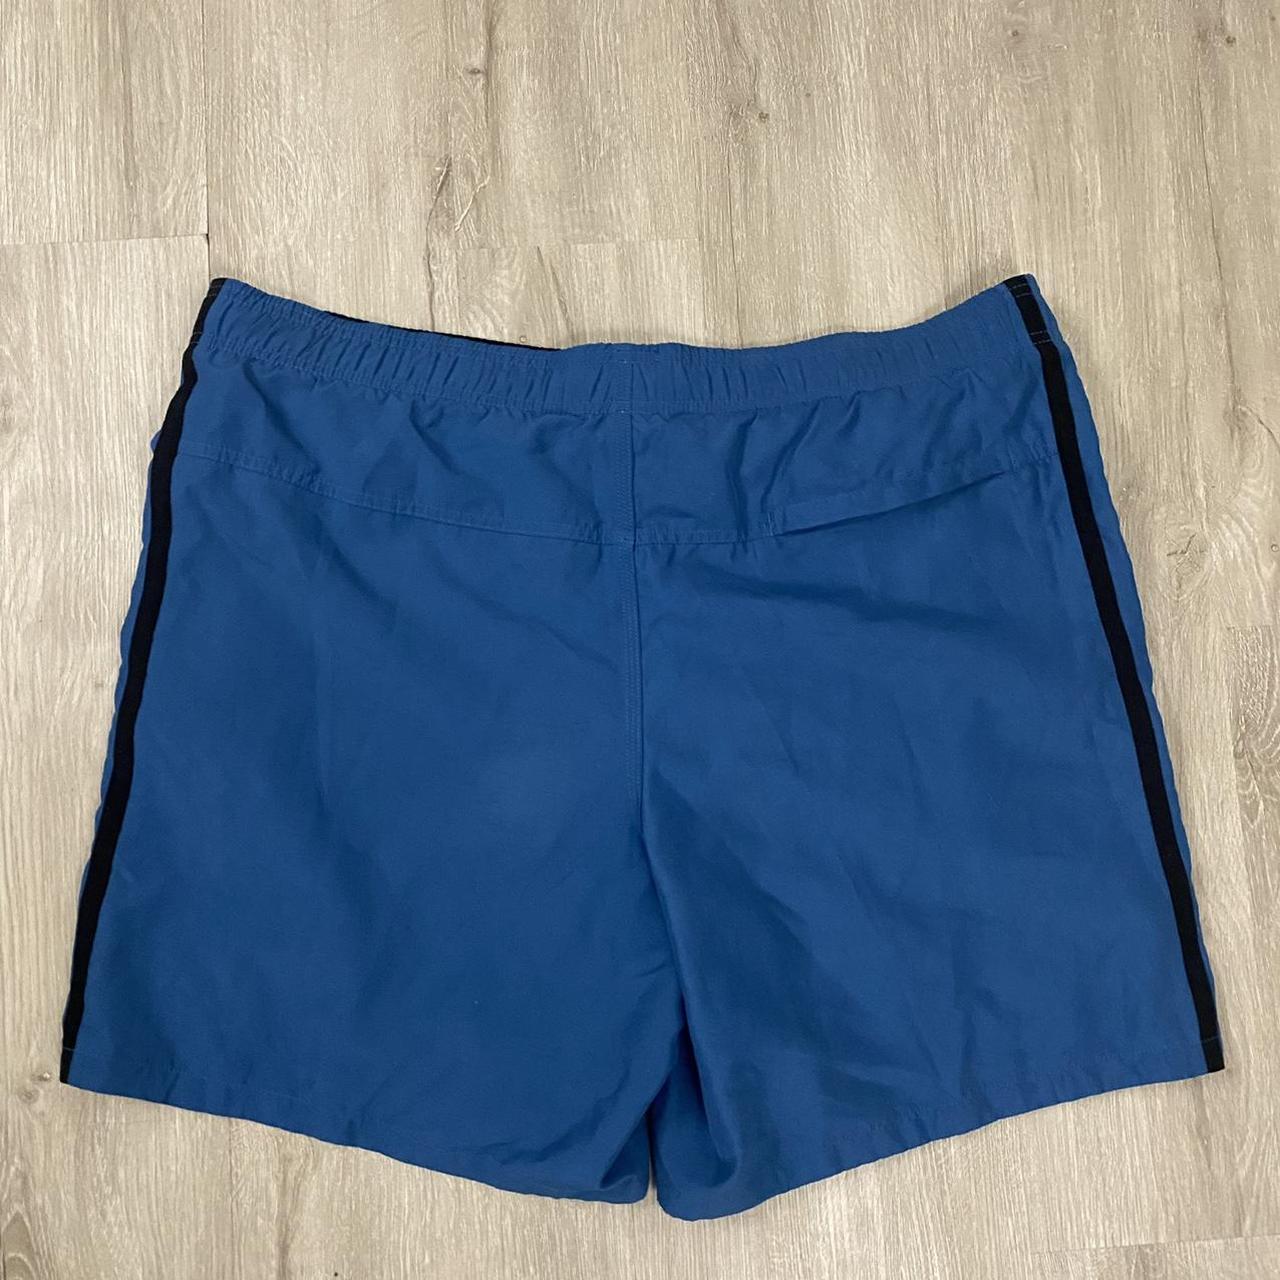 Product Image 2 - Vintage speedo shorts 
In great